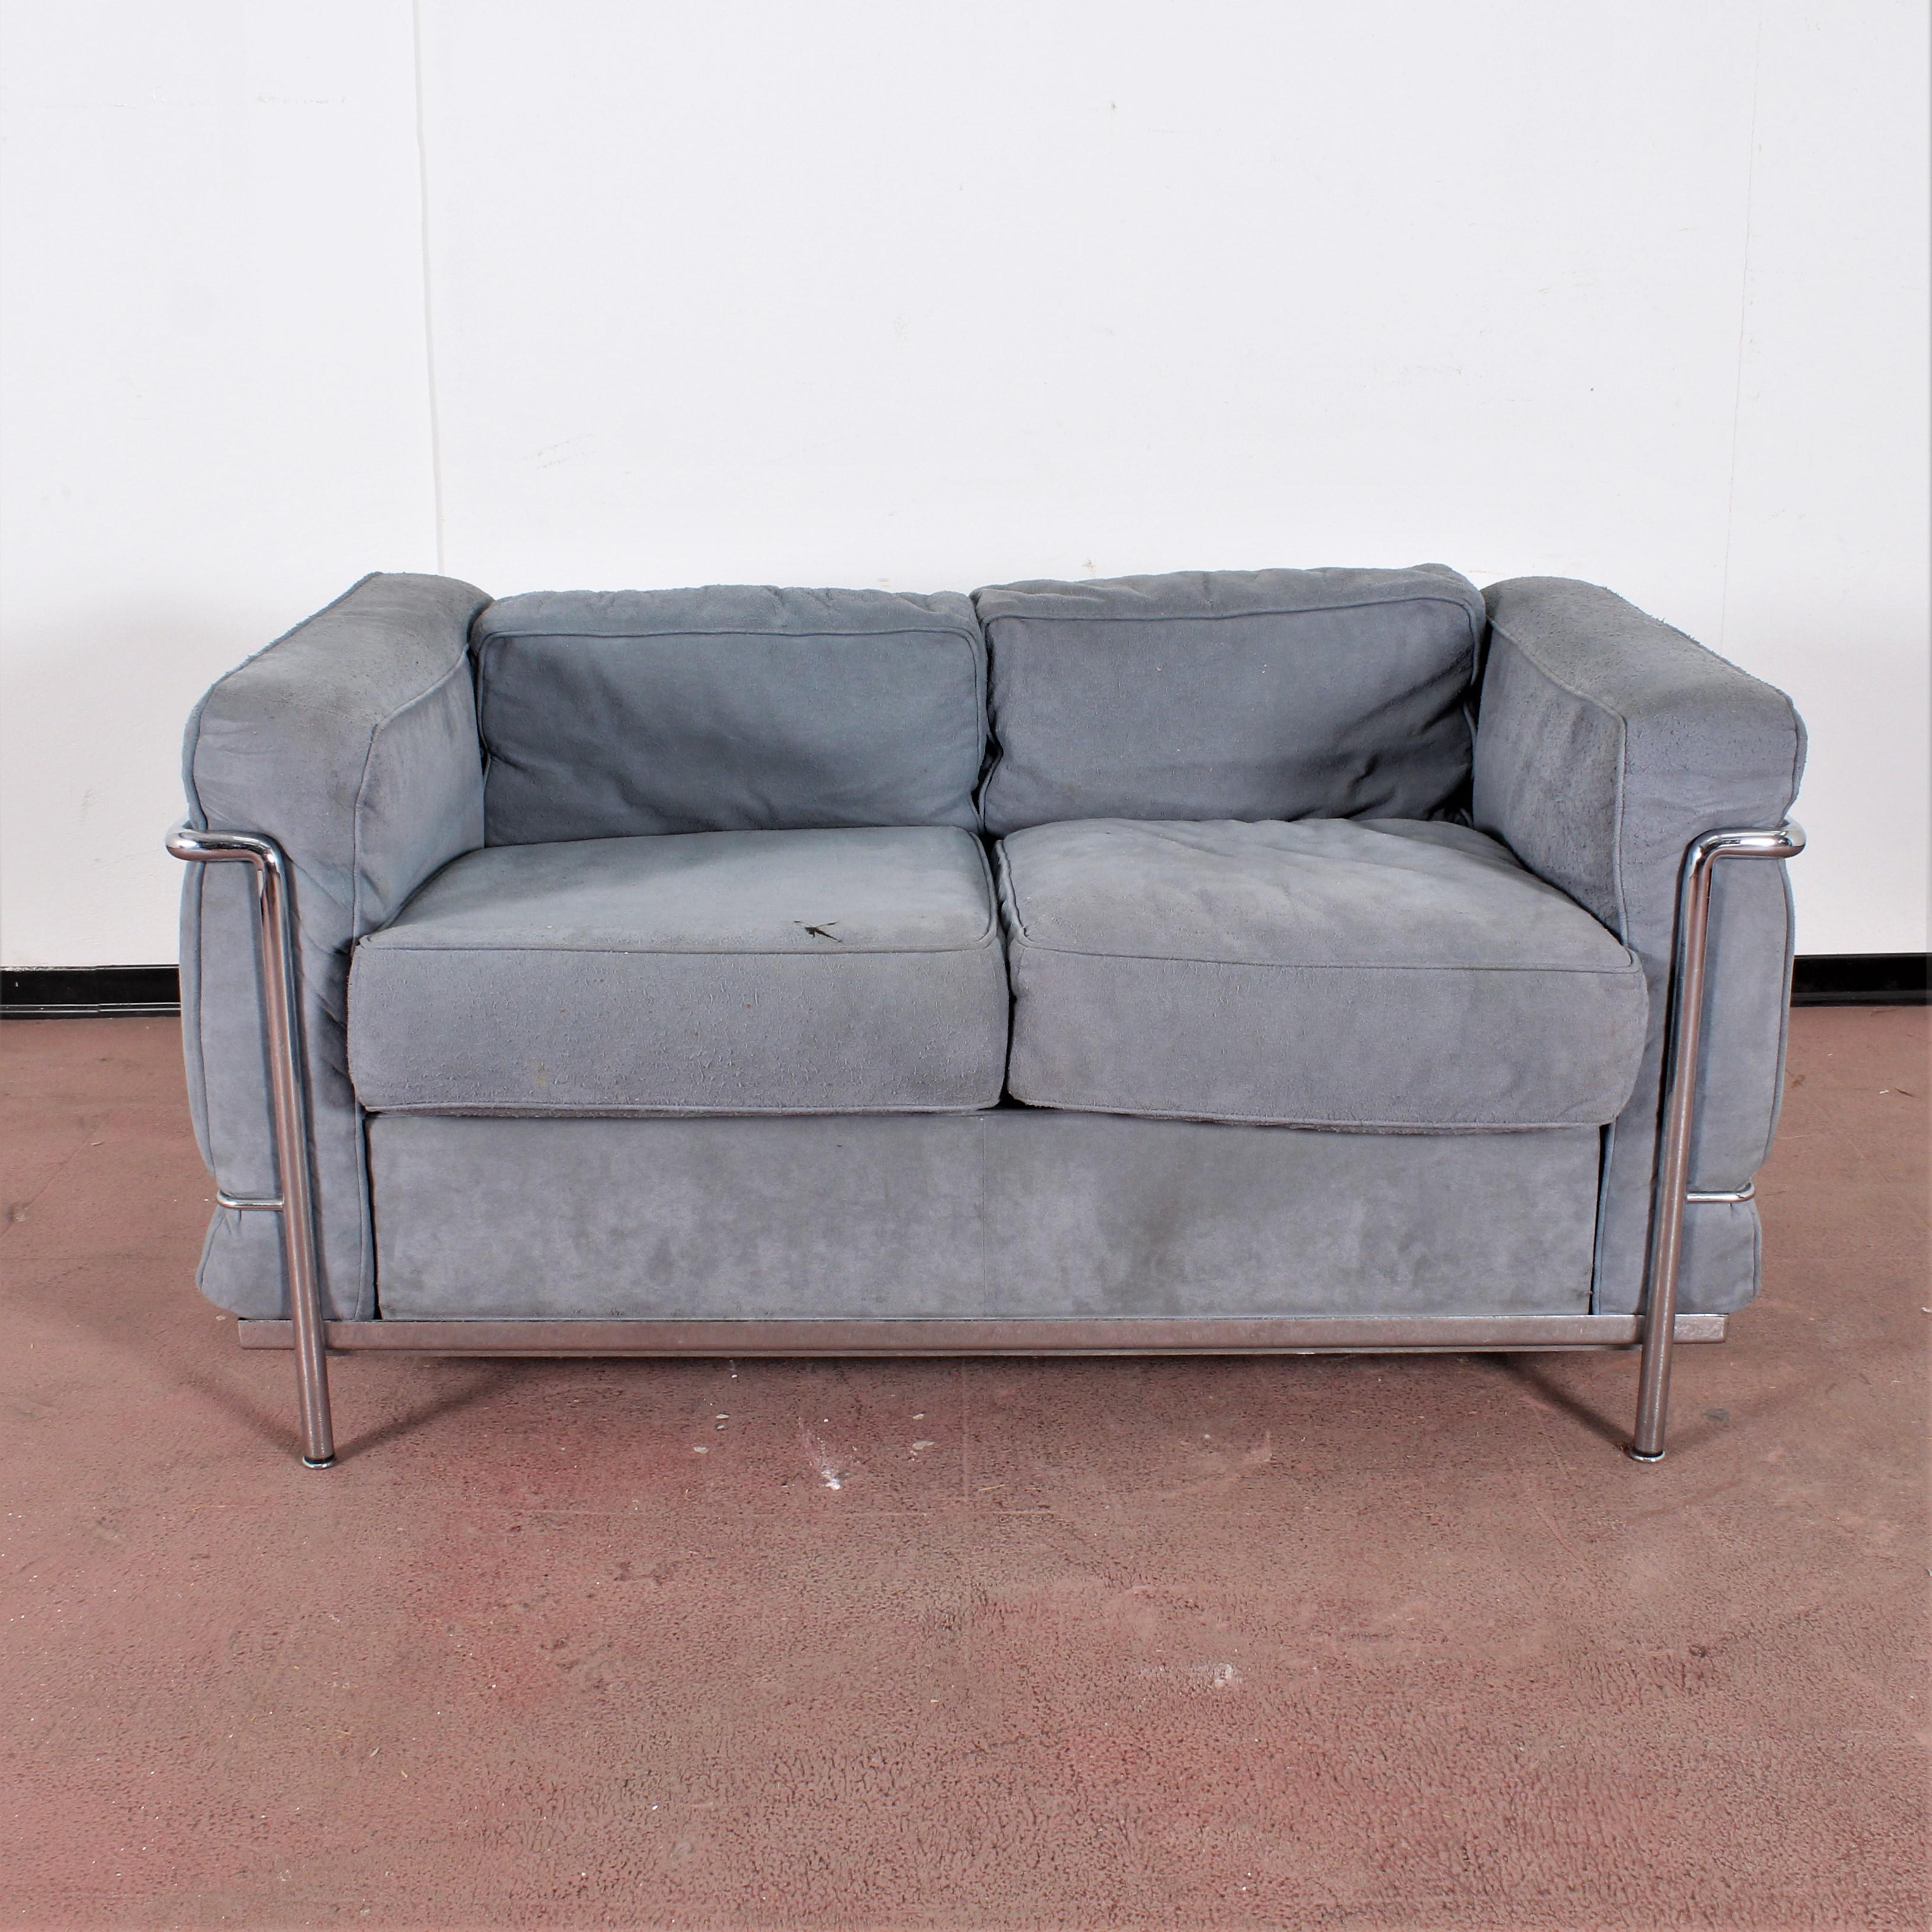 Two-seat gray chamois leather sofa, mod. LC2 designed by Le Corbusier and produced by Cassina in 1970s
It features a chromed tubular steel frame
Engraved brand visible on a chromed steel tube
Wear consistent with age and use.